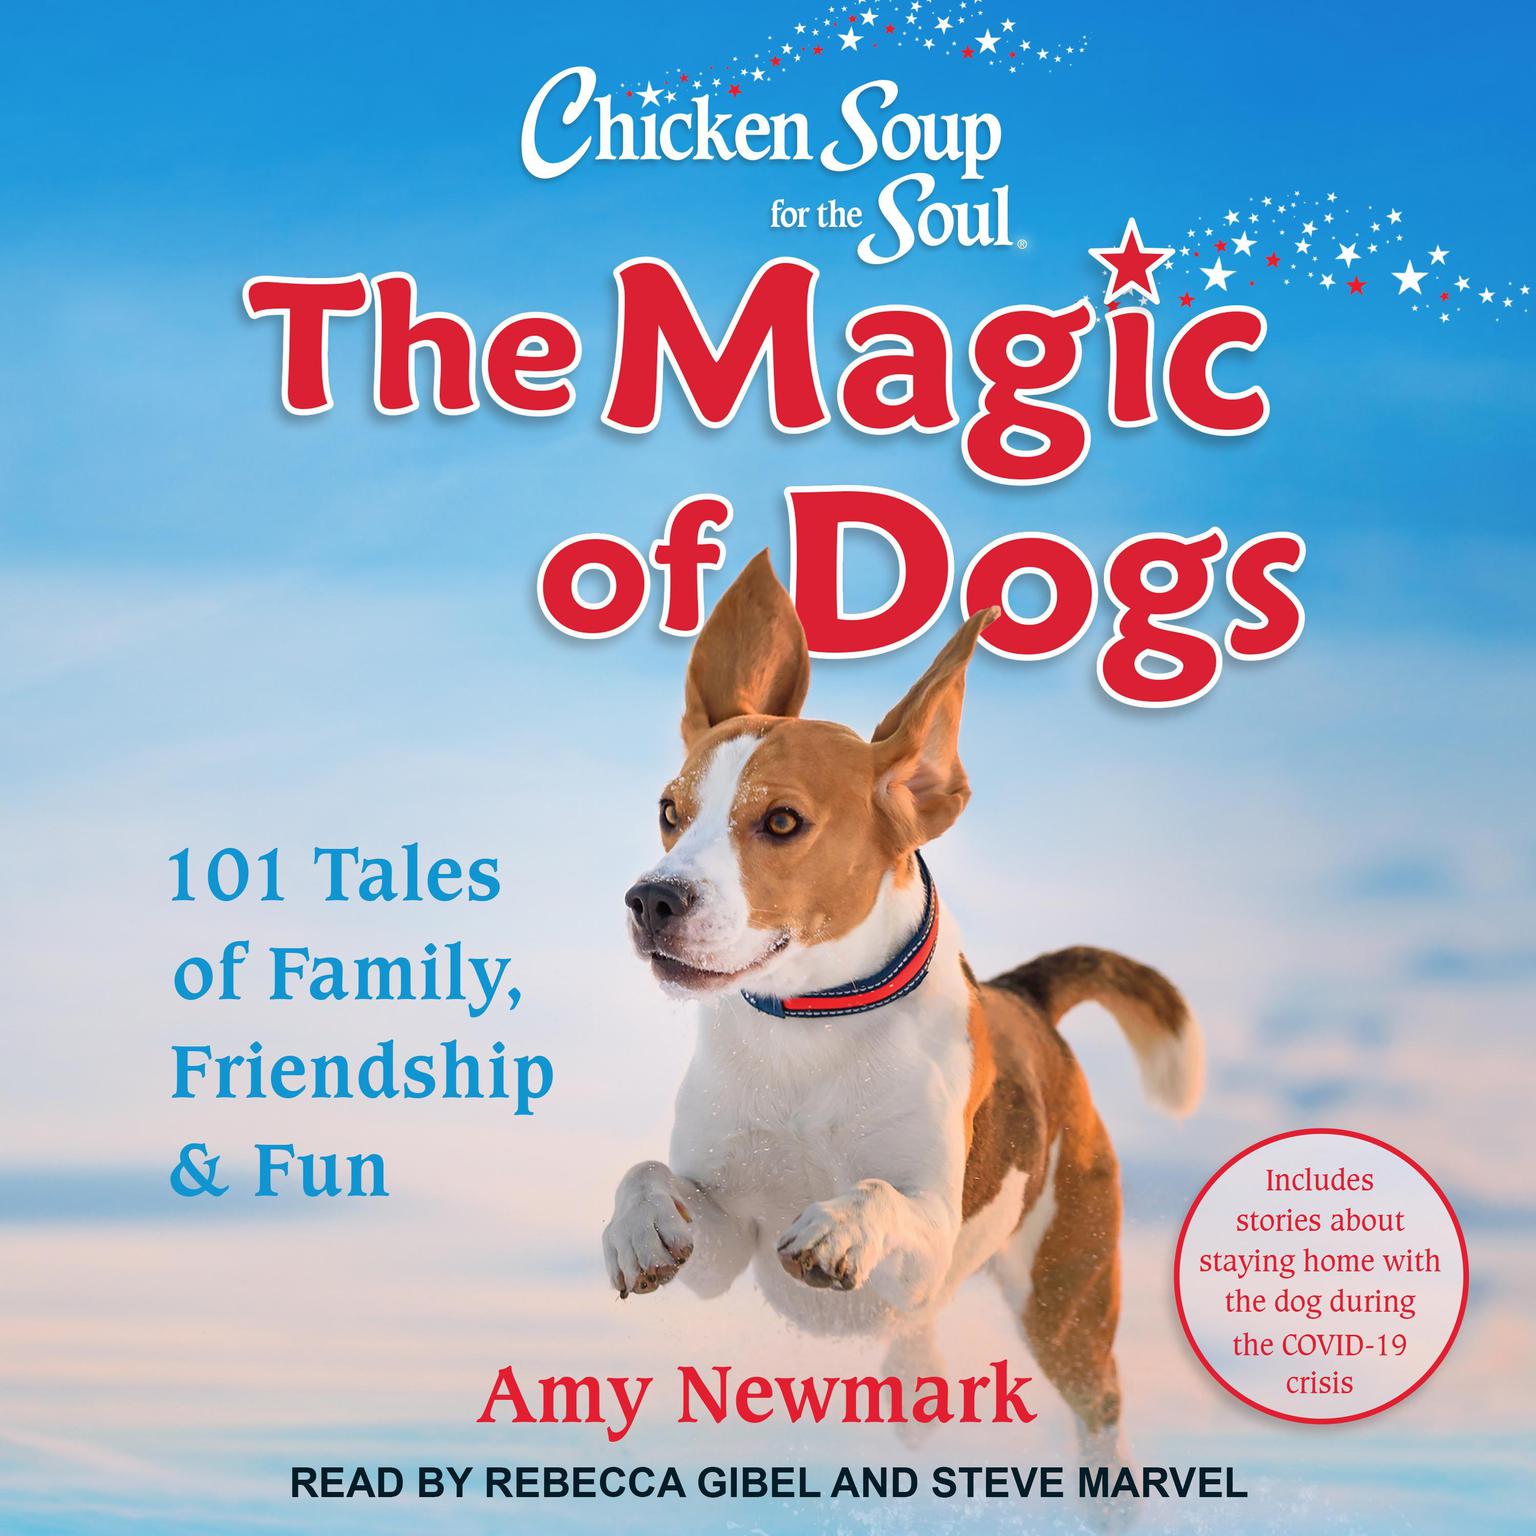 Chicken Soup for the Soul: The Magic of Dogs: 101 Tales of Family, Friendship & Fun Audiobook, by Amy Newmark